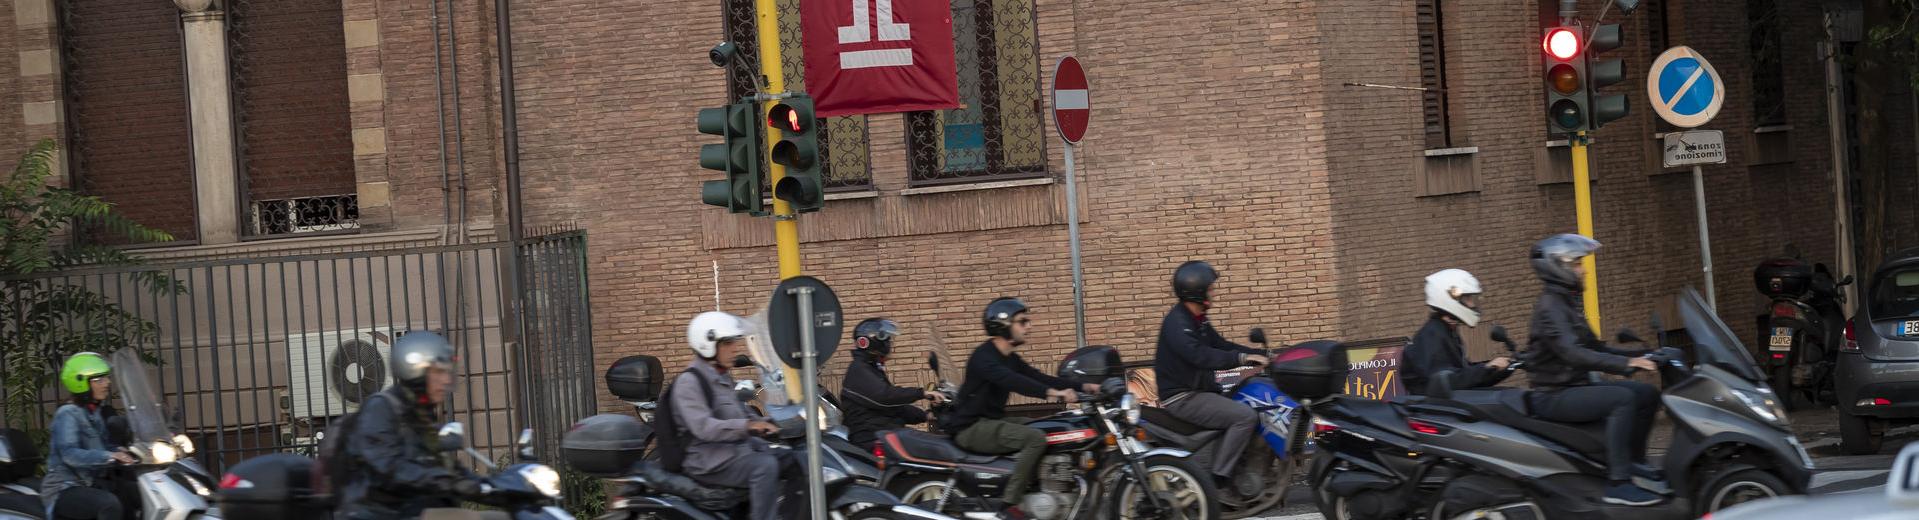 A group of people on motorcycles on an Italian street near Temple Rome.